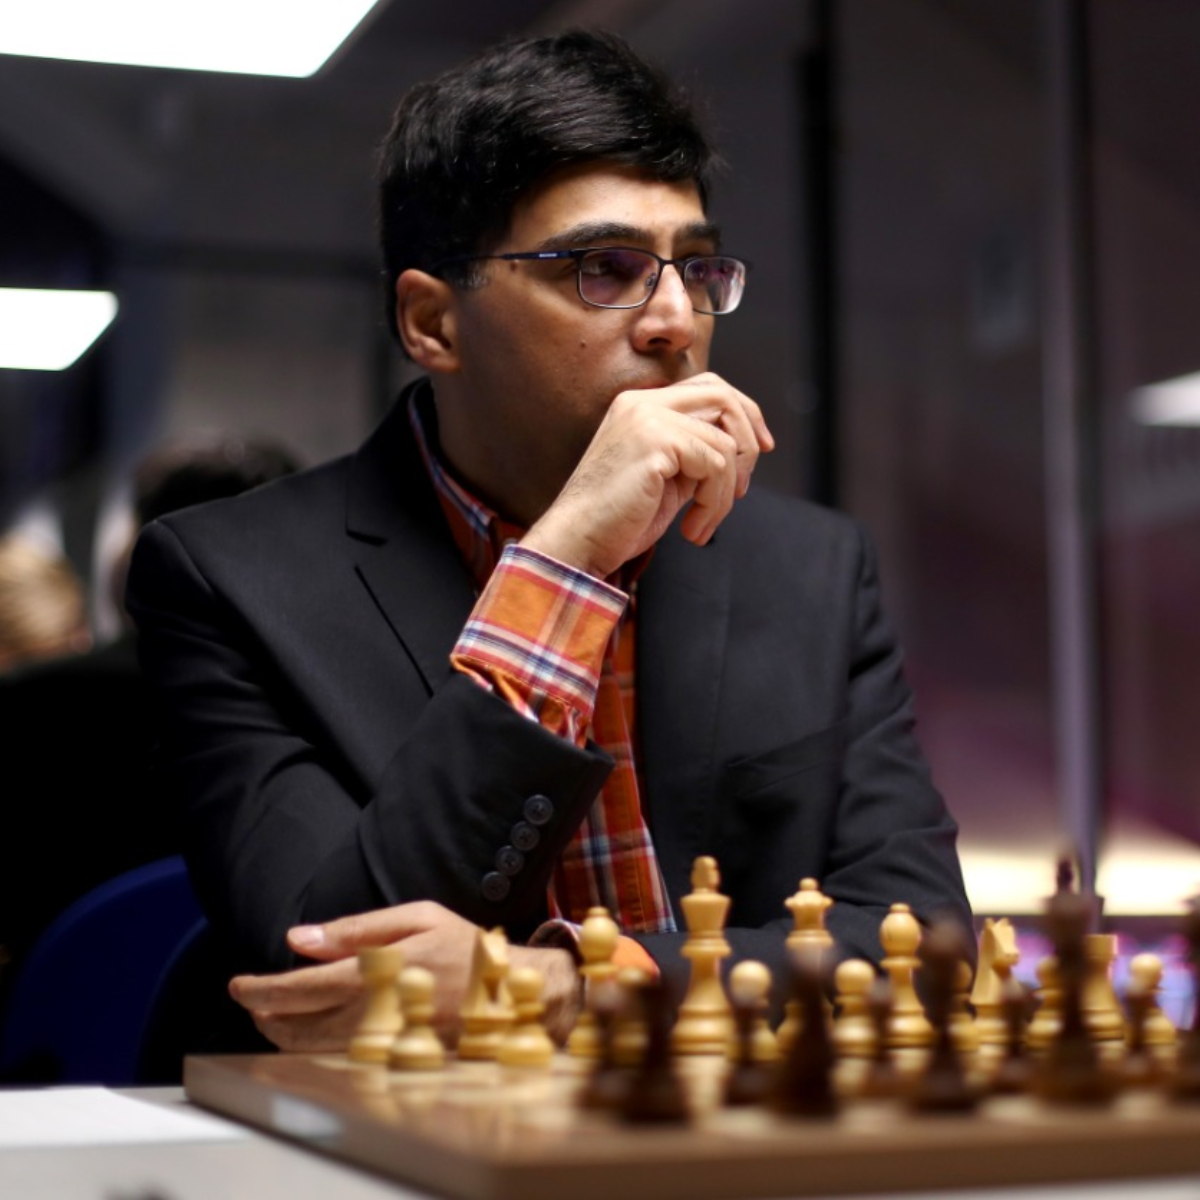 EXCLUSIVE: Sudha & Narayana Murthy’s biopic likely to start this year; Viswanathan Anand film to roll in 2022